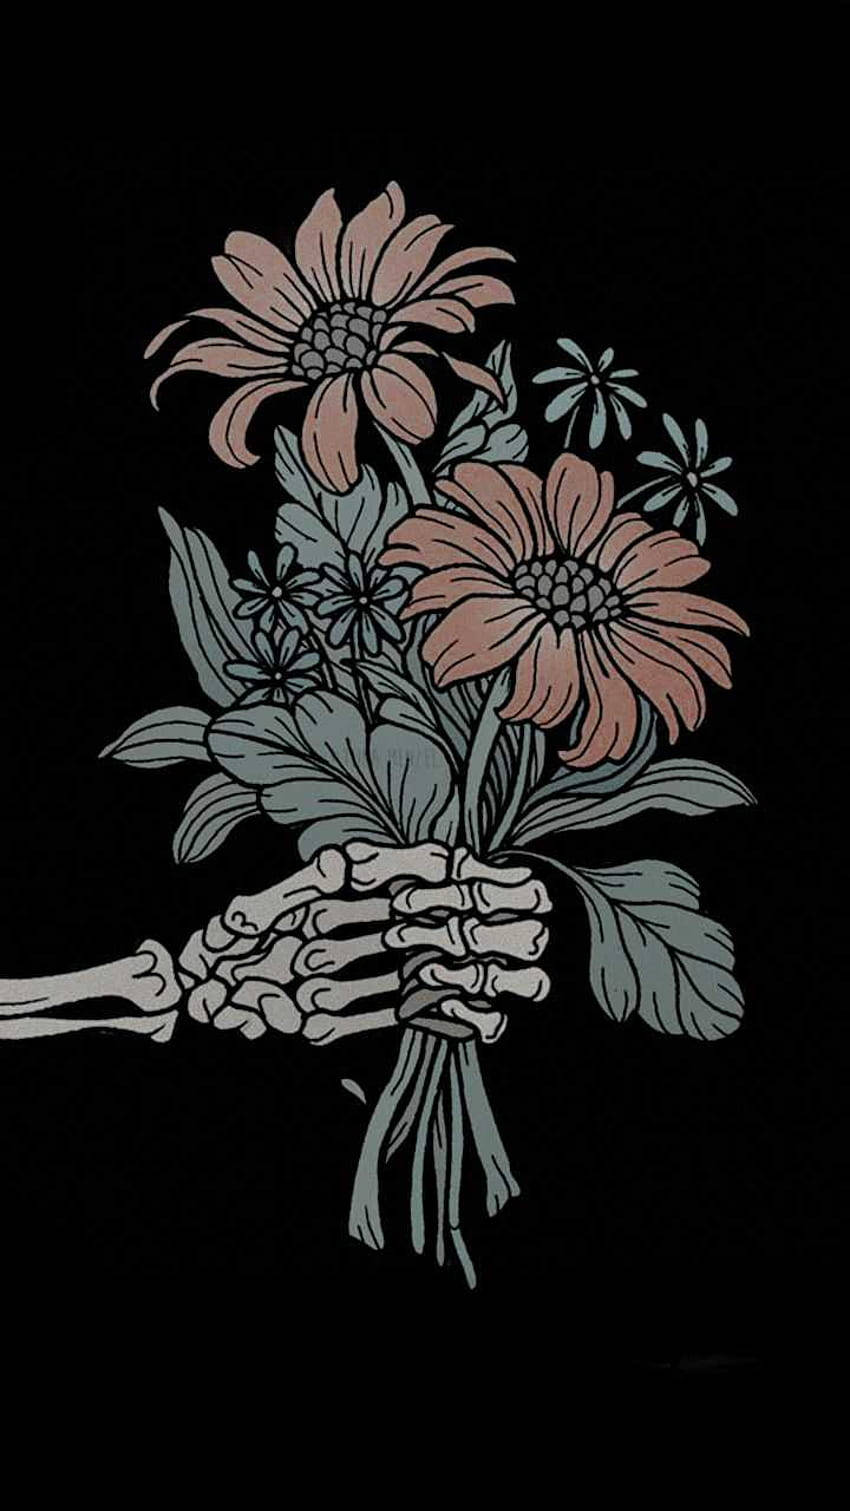 A skeleton holding flowers in its hand - Gothic